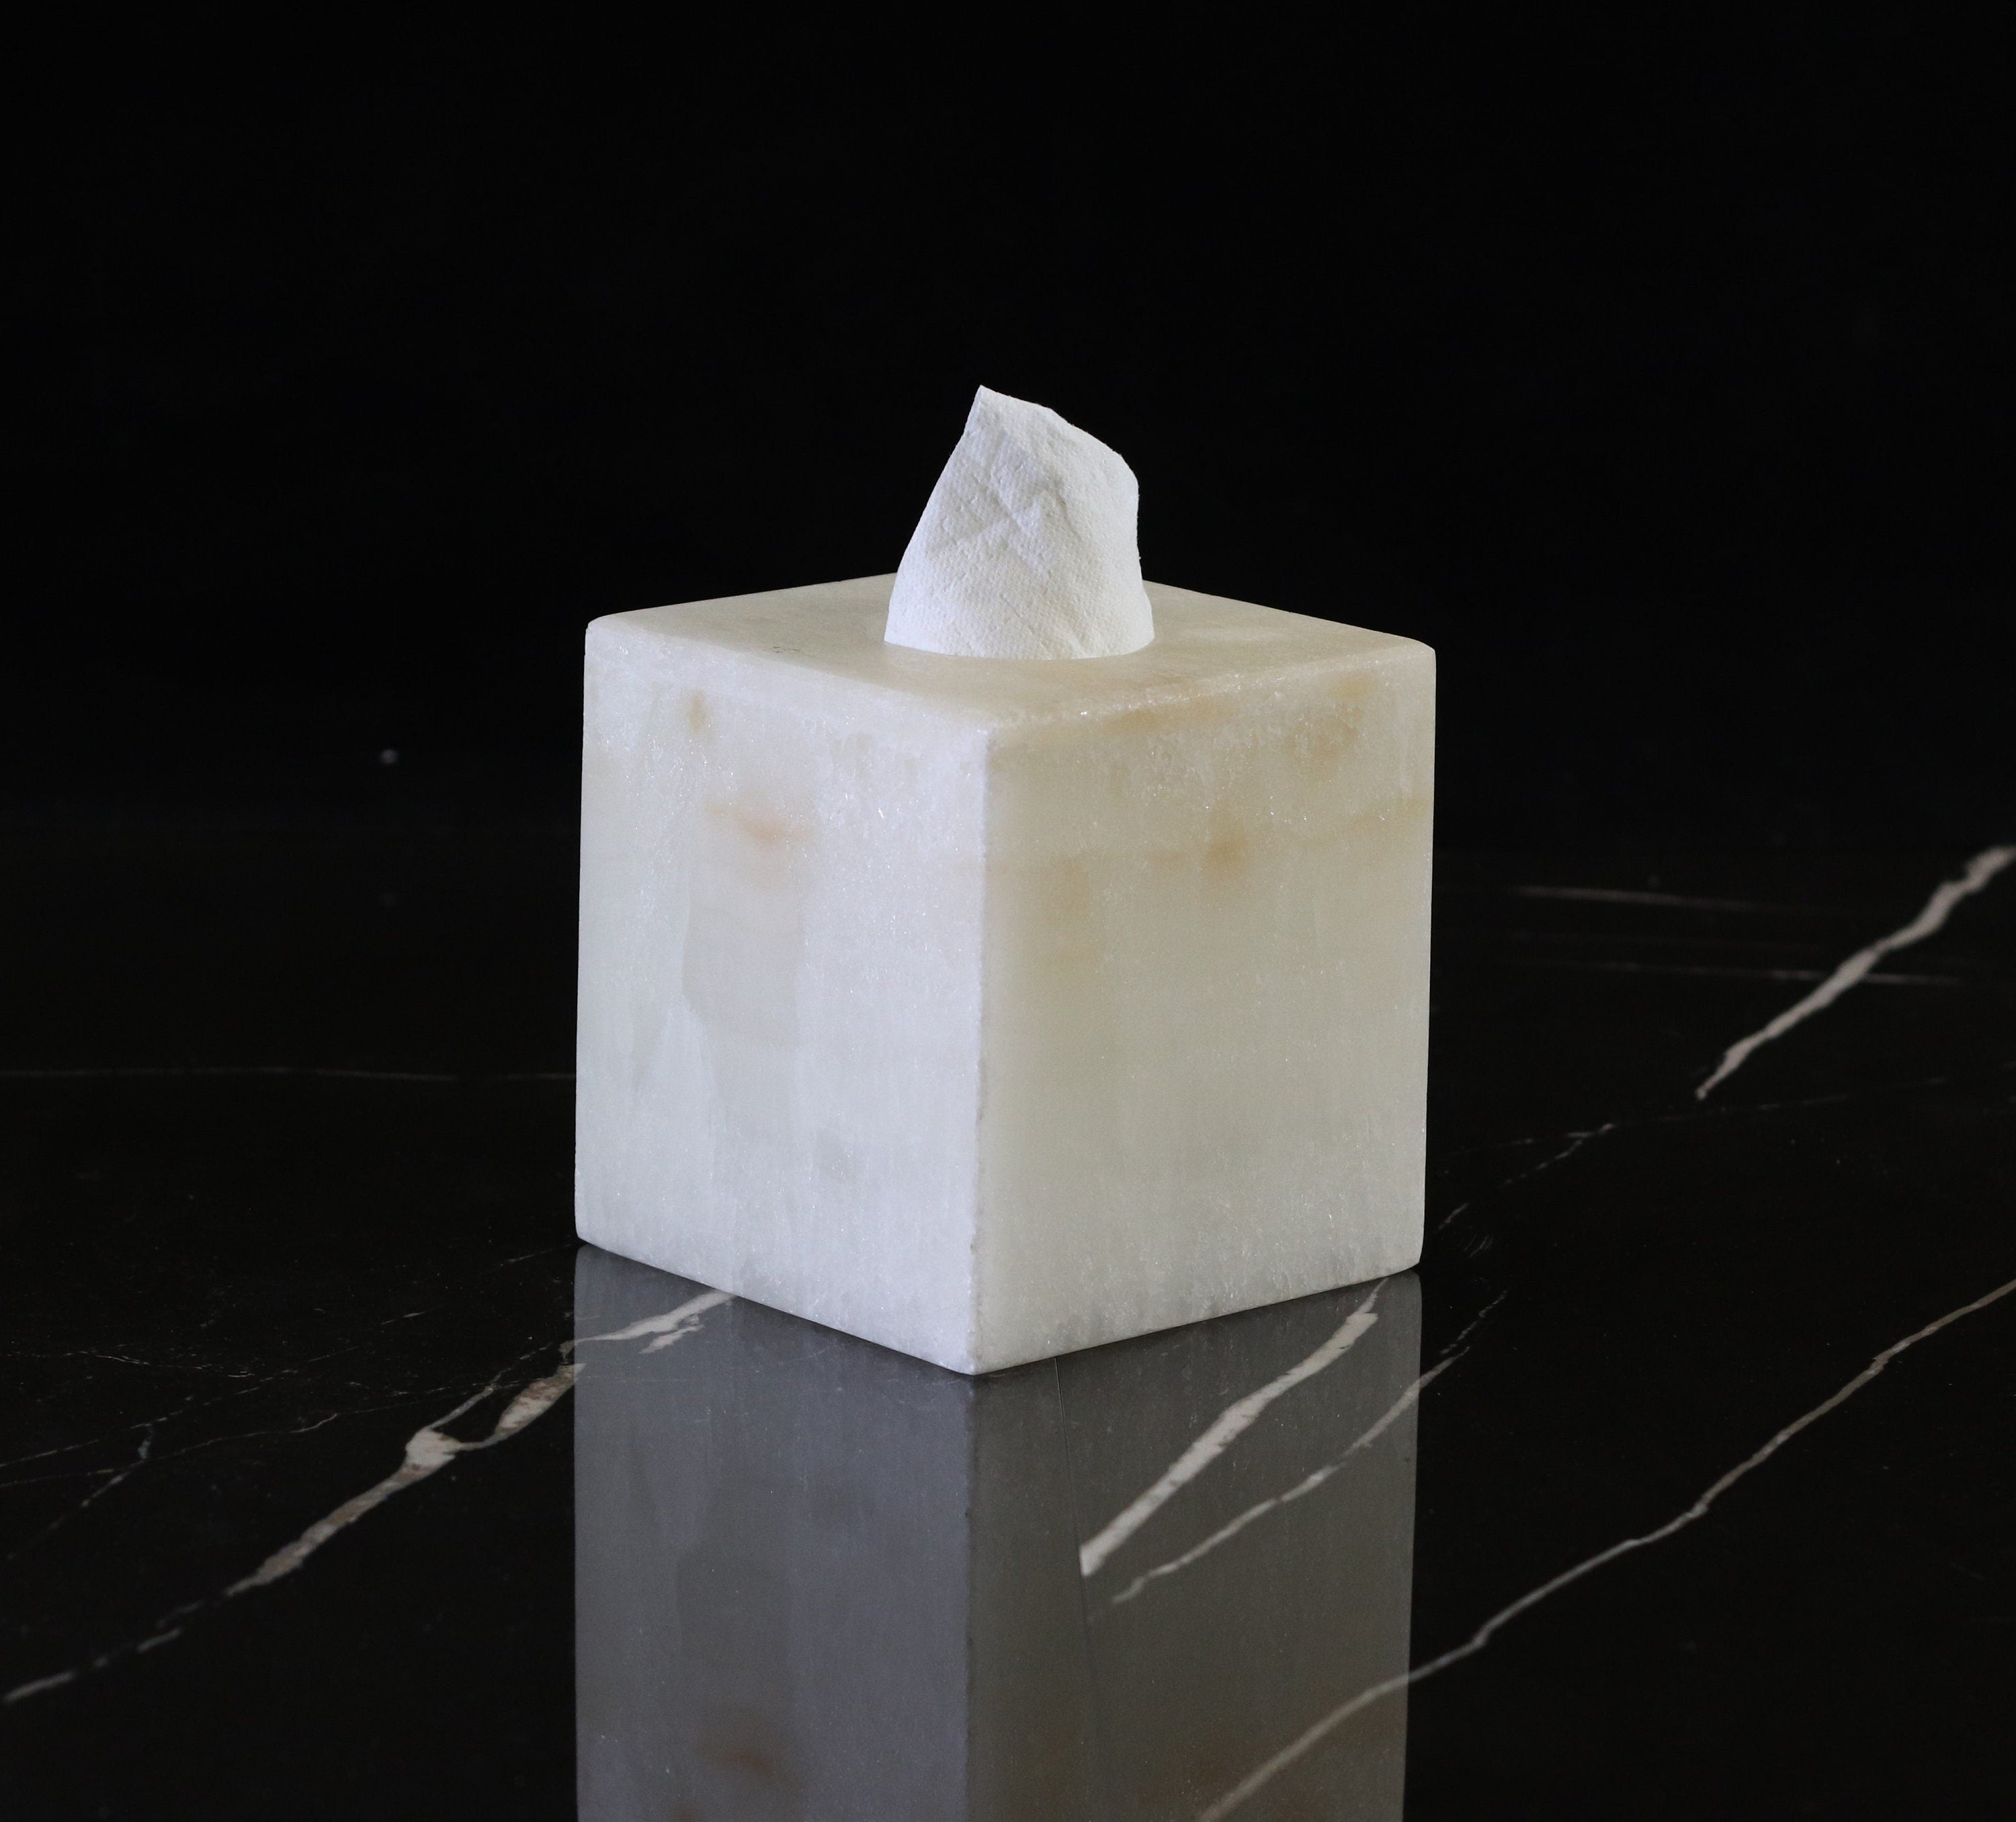 White onyx stone tissue box cover. Hand hewn from a single block of stone. Handmade in Mexico. Ships from the USA. Buy now at www.felipeandgrace.com.  